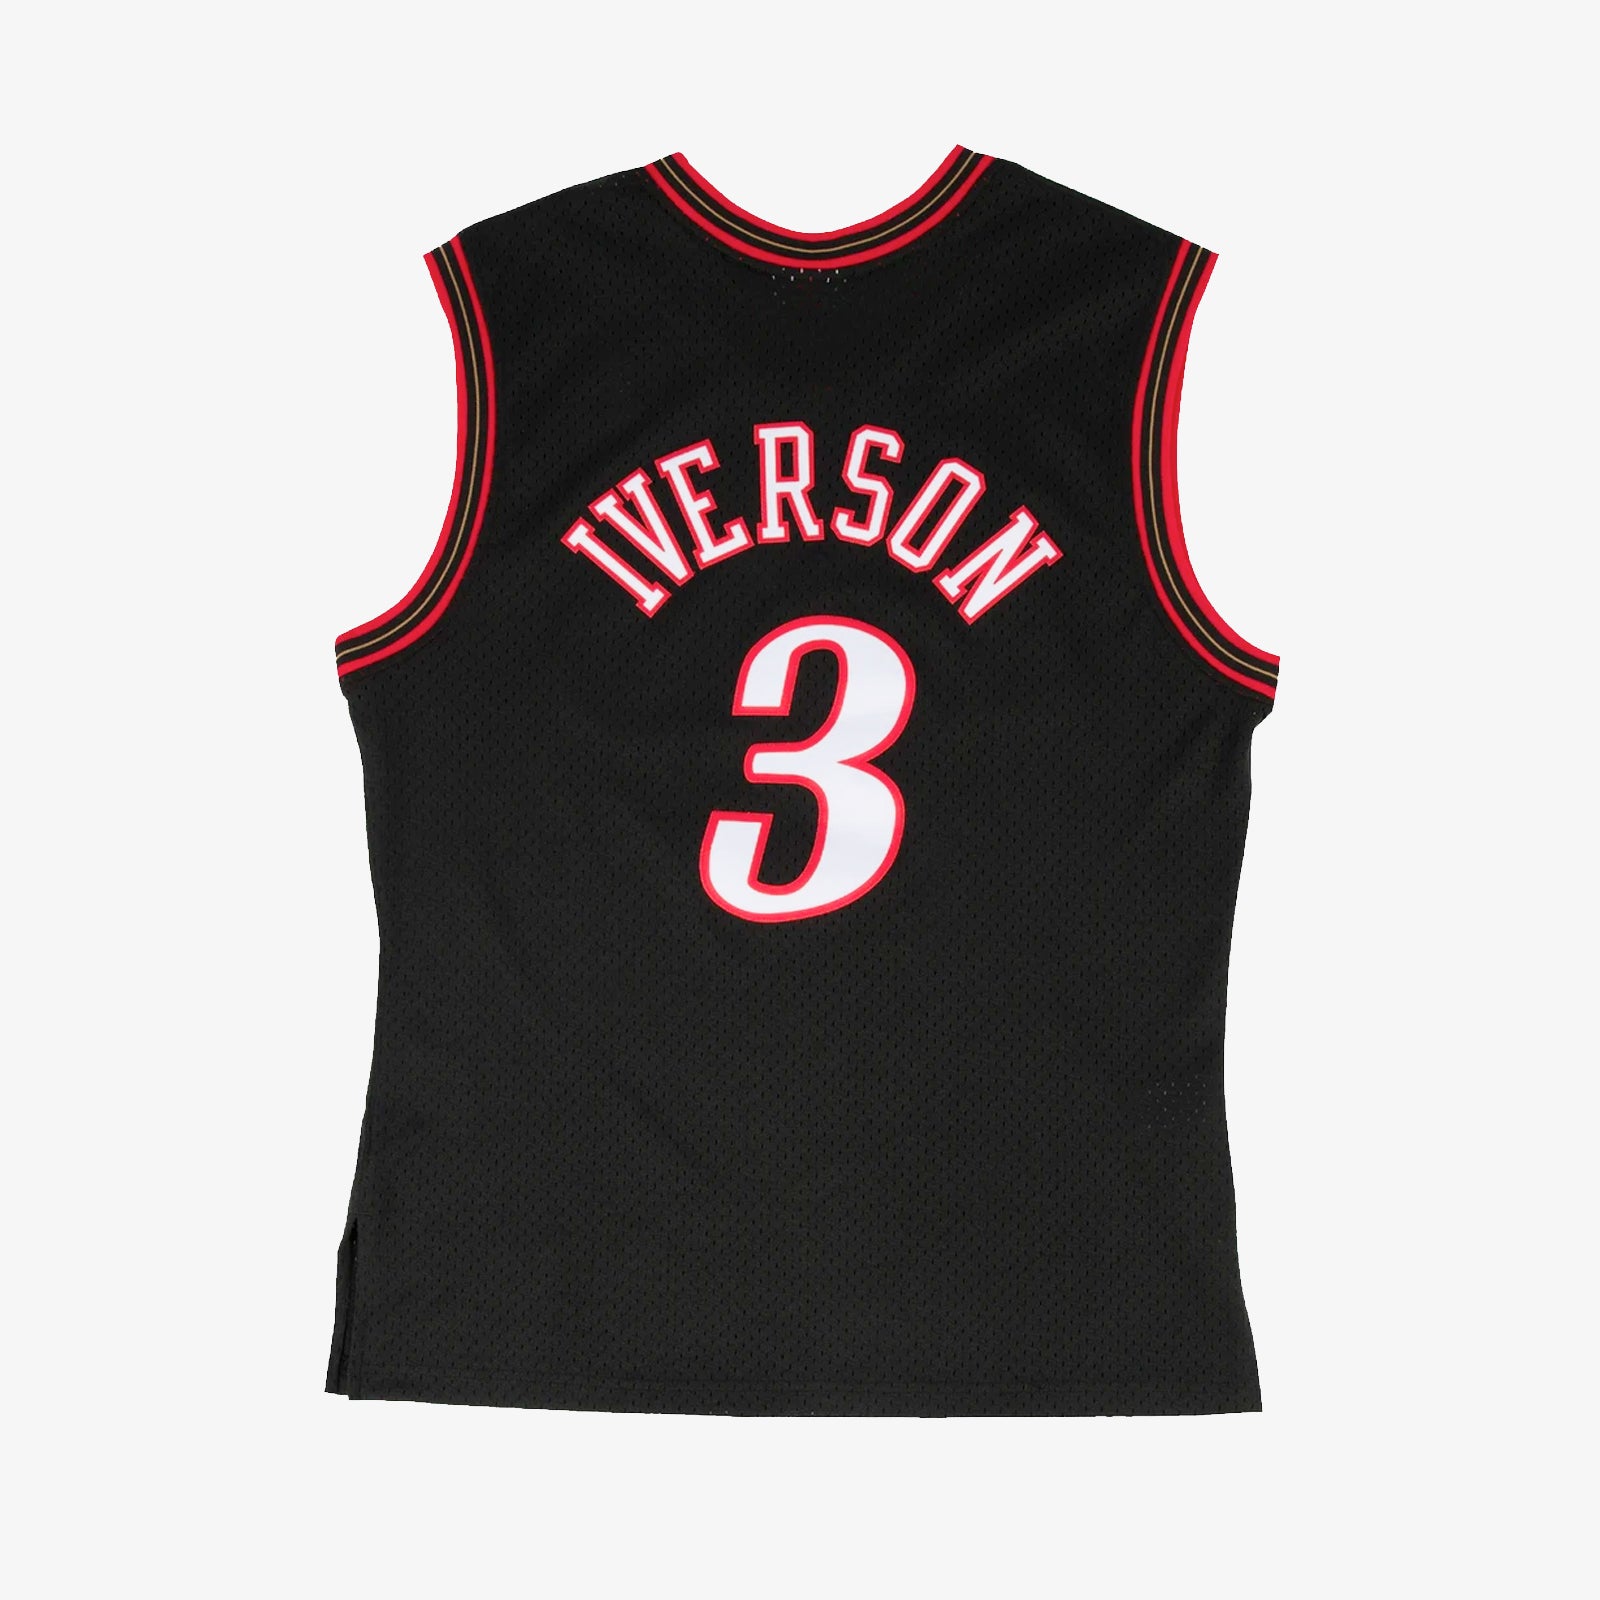 Iverson back with Philly